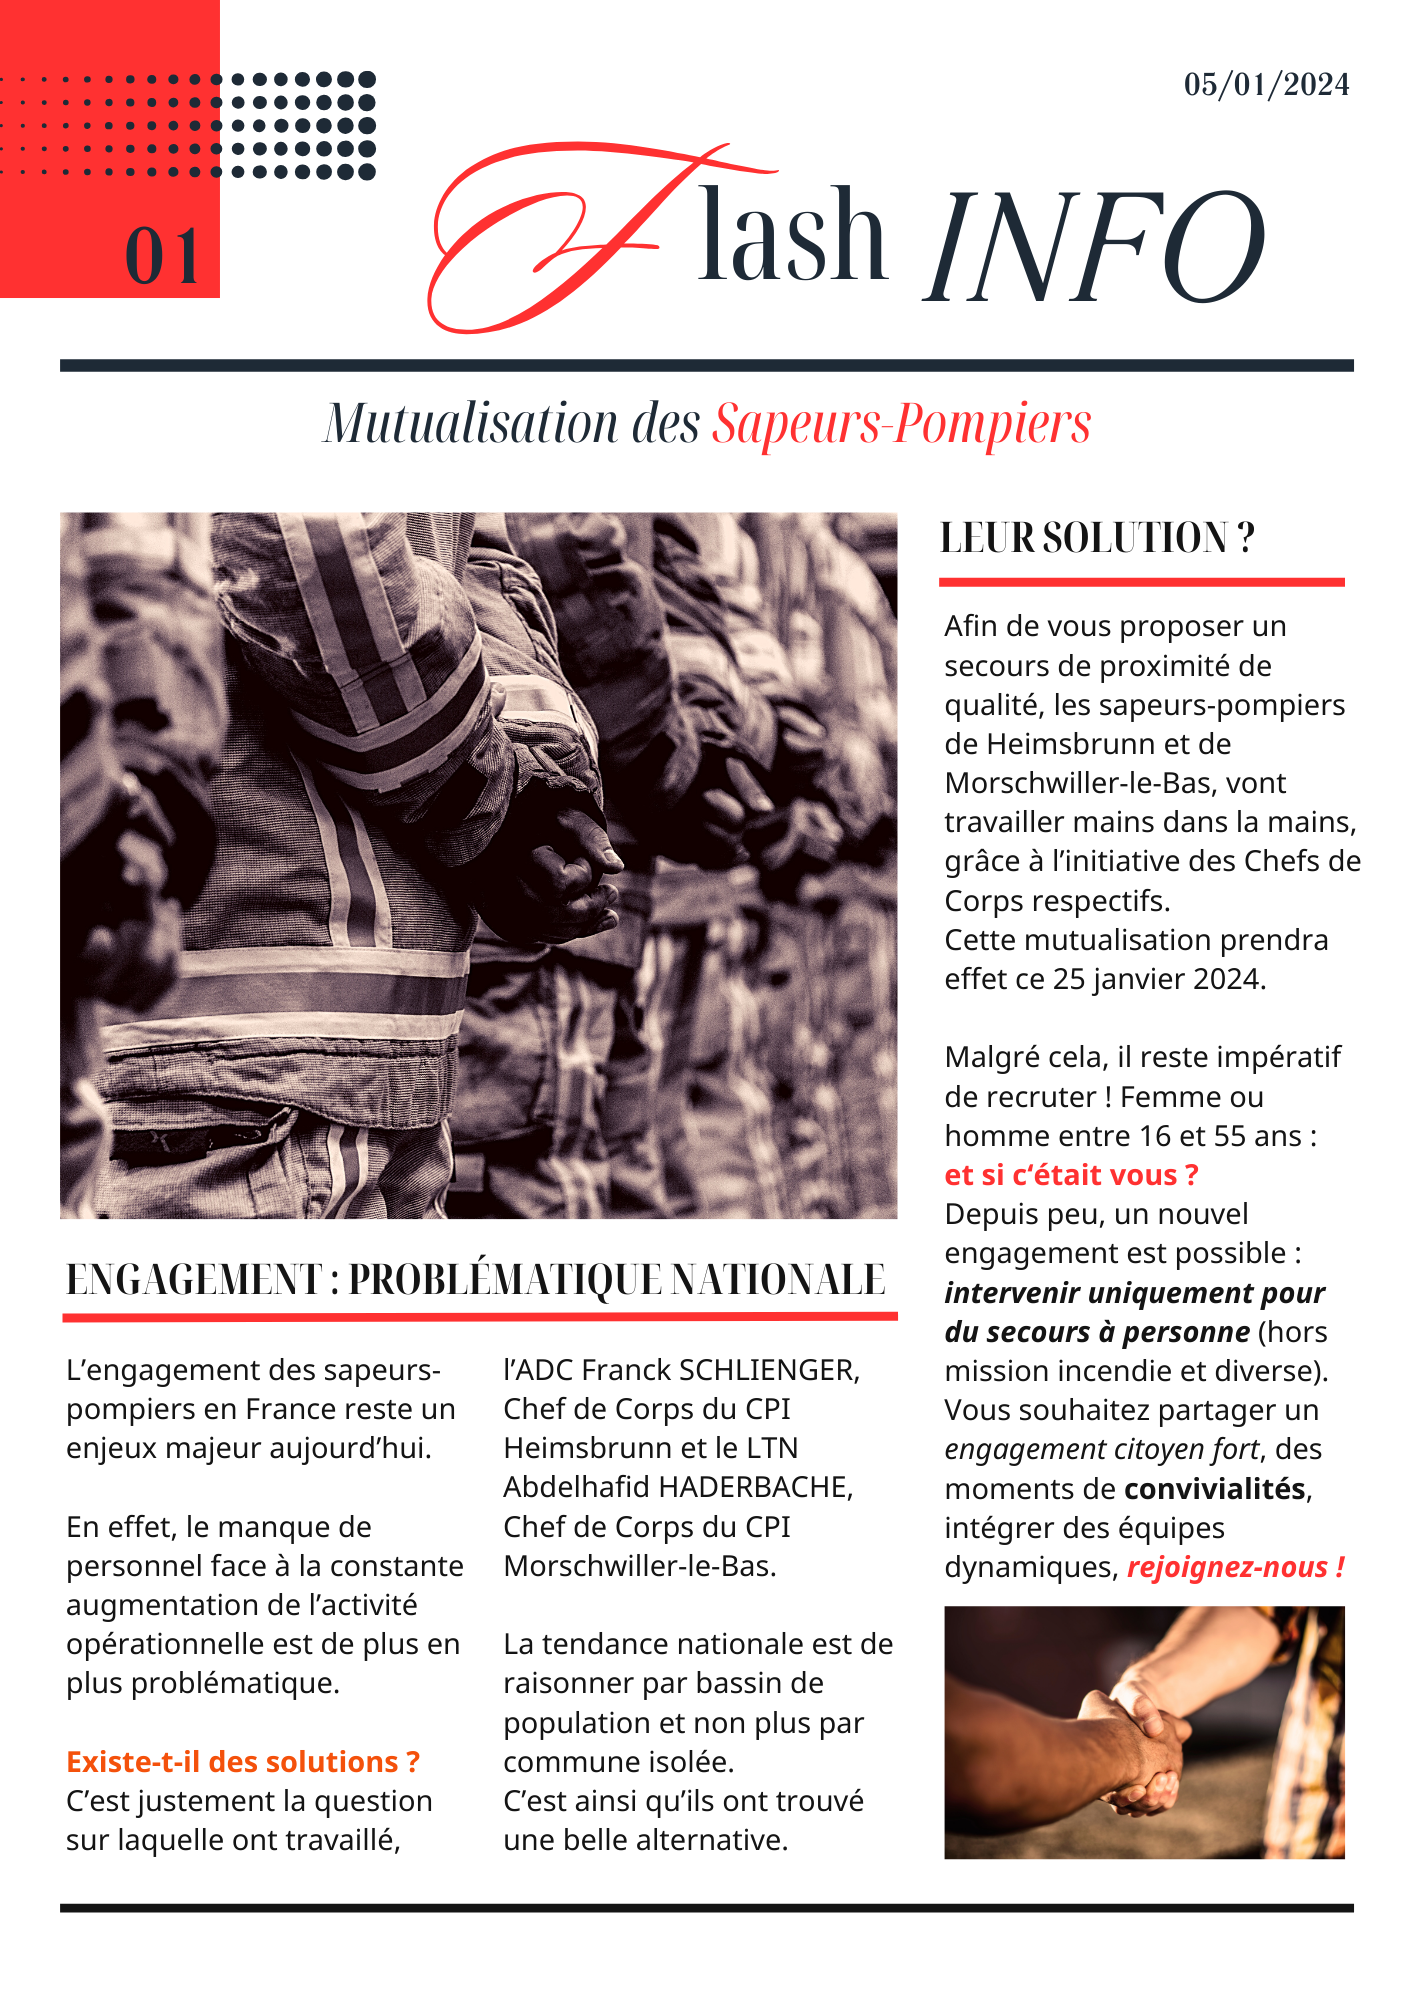 Article Mutualisation CPI Heims-Morsch - p1.png